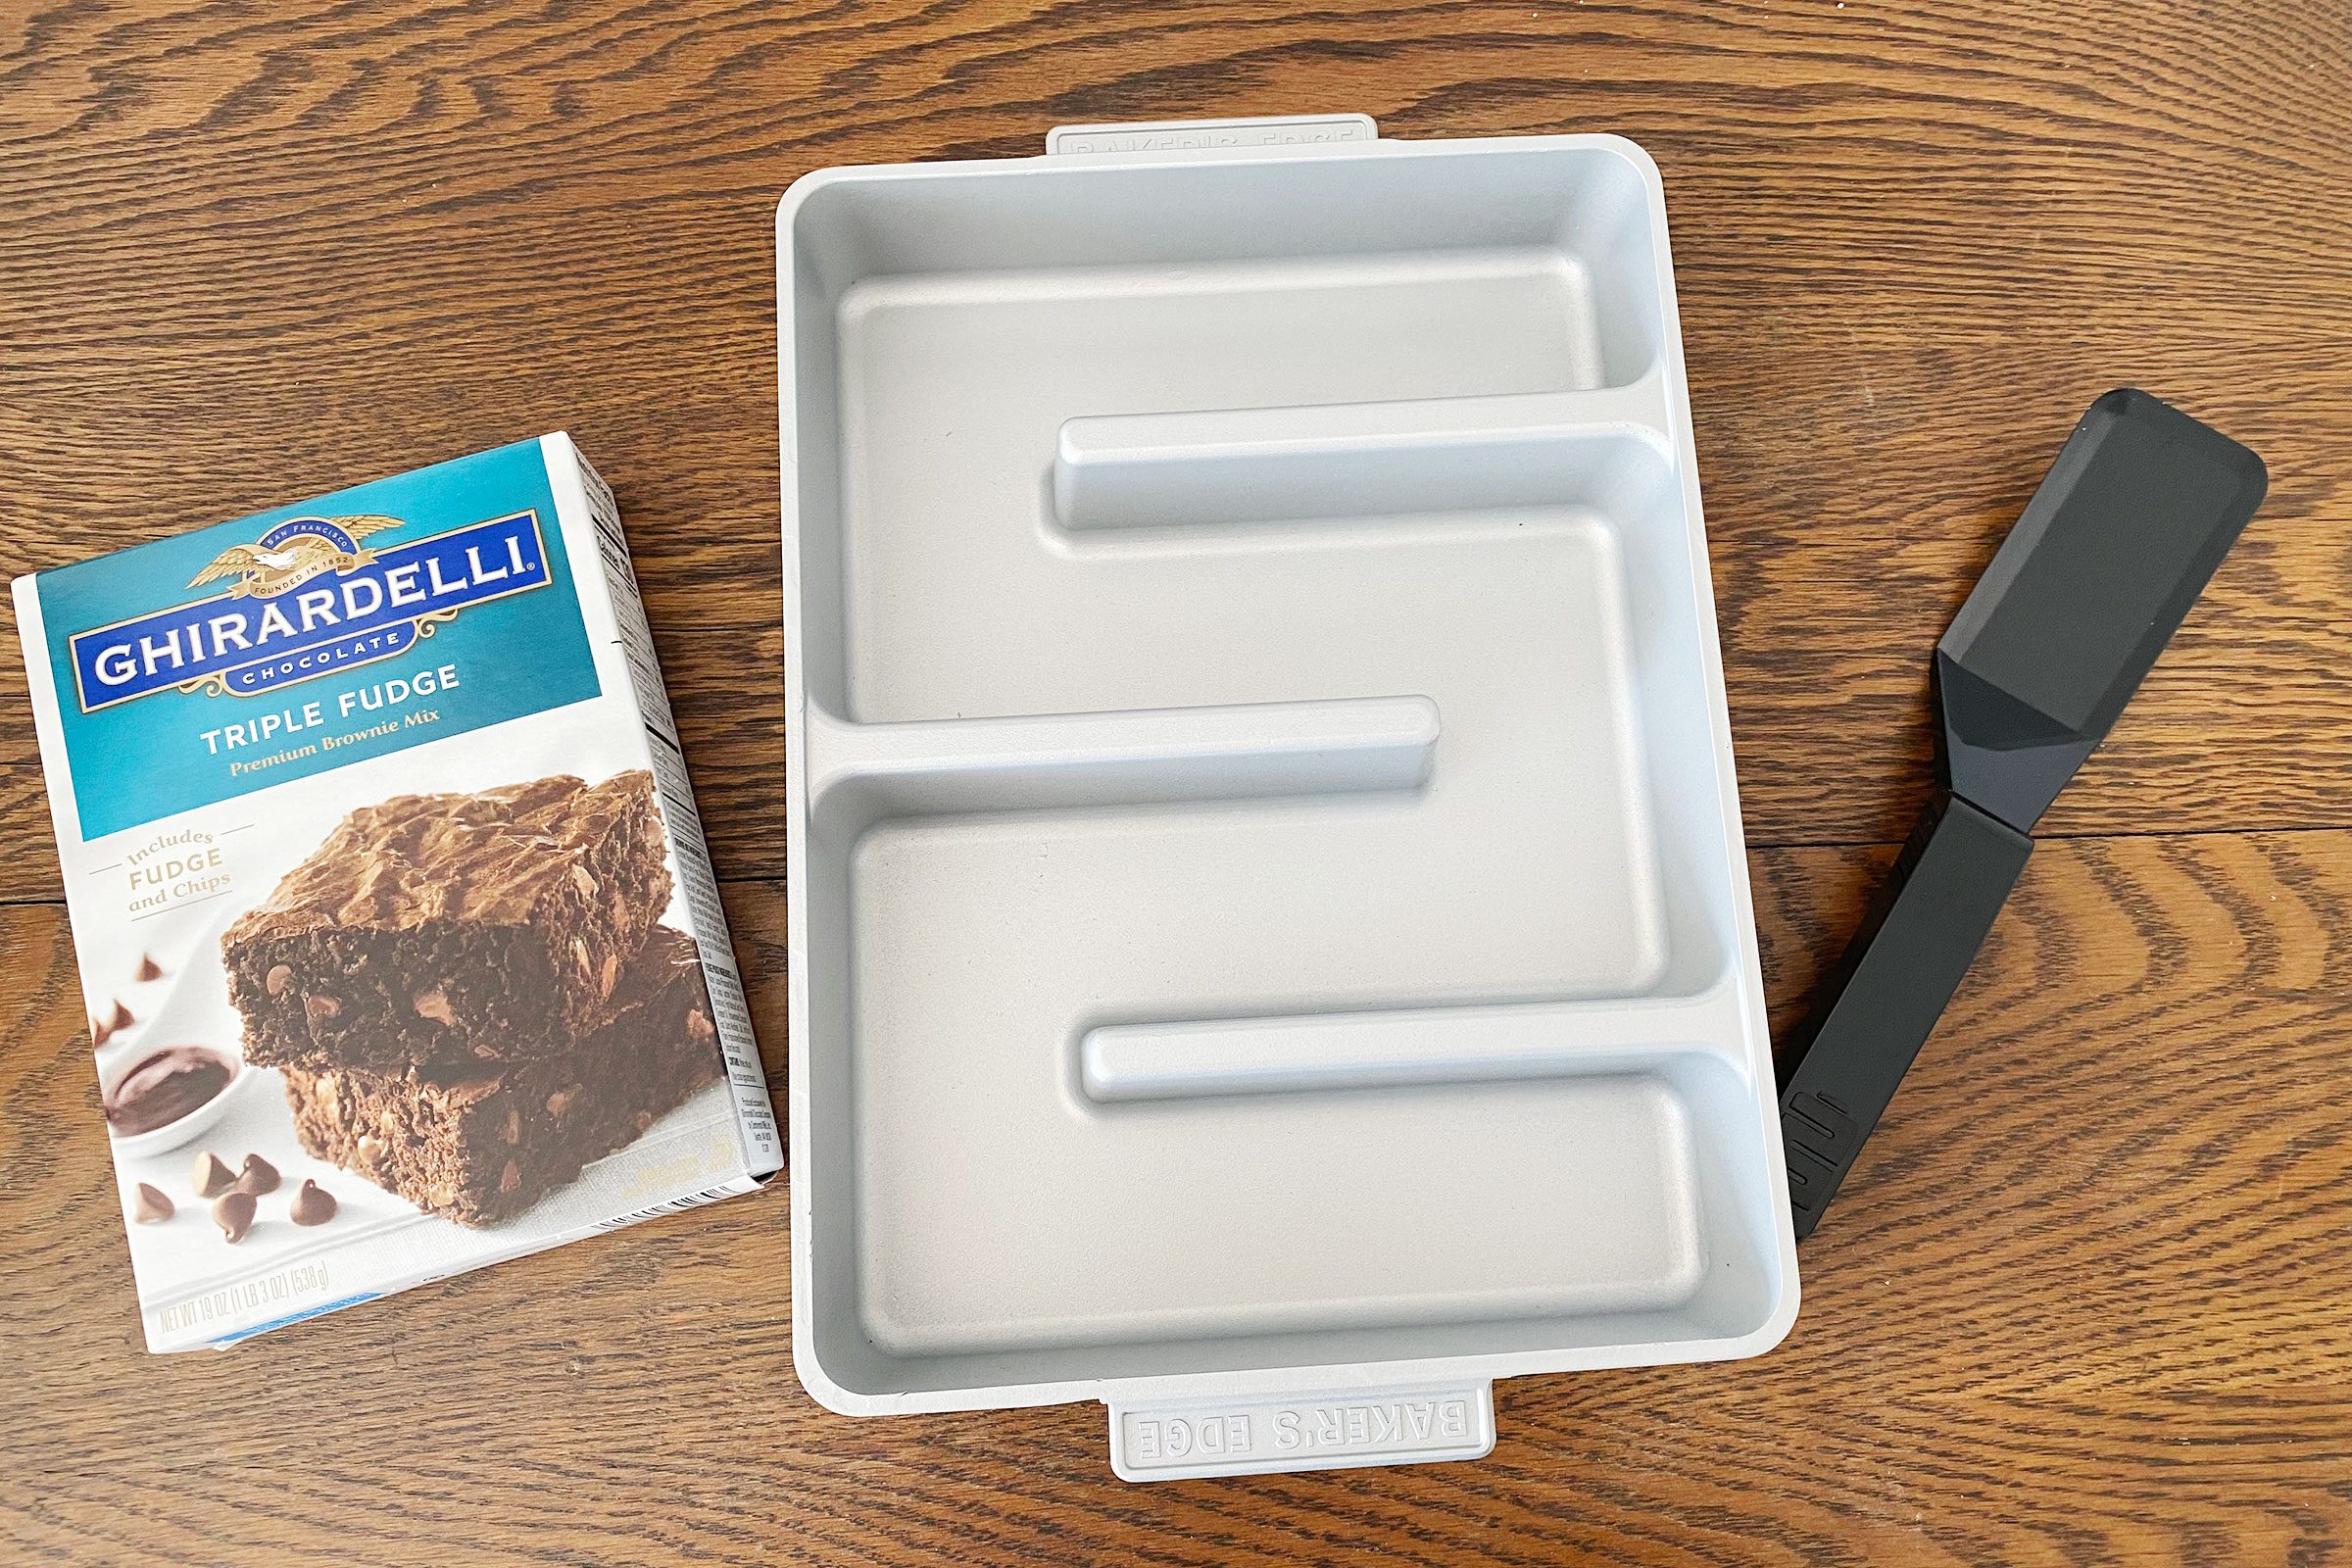 This Is The Best Brownie Pan For Perfect Edges